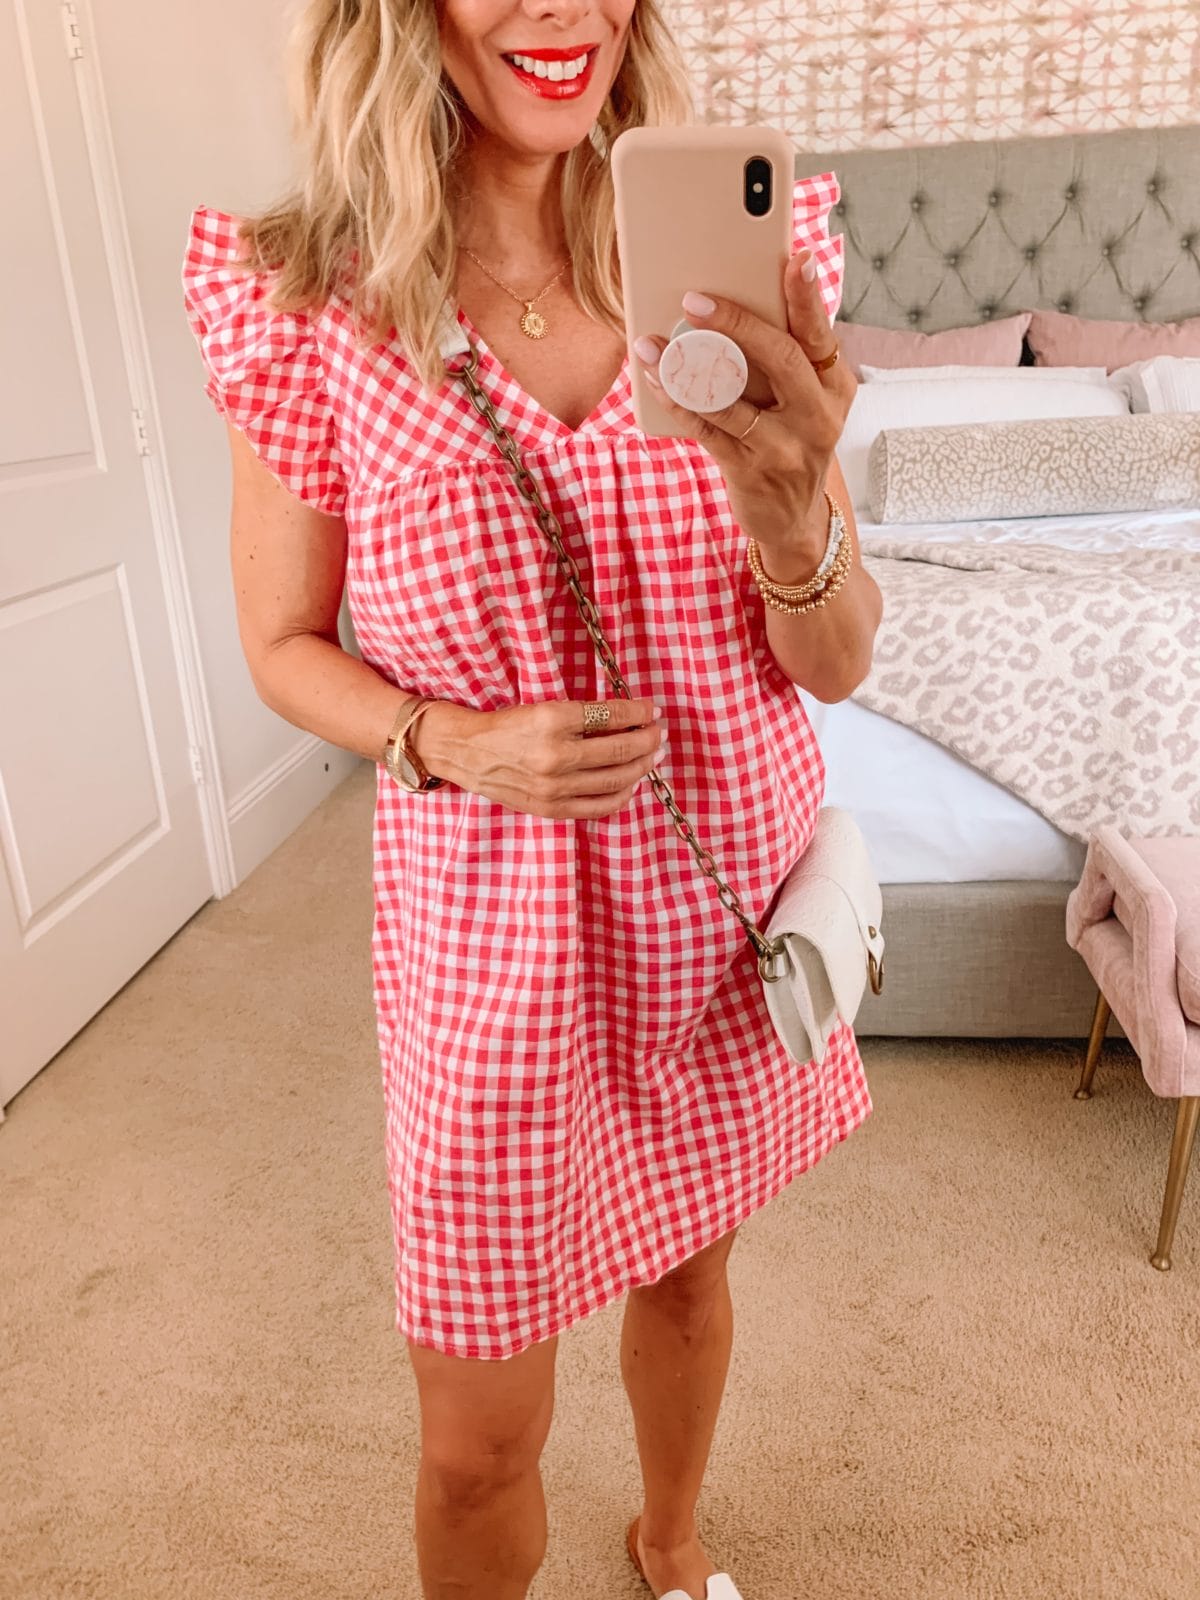 Amazon Fashion Faves, Pink Gingham Dress and Sandals with Crossbody